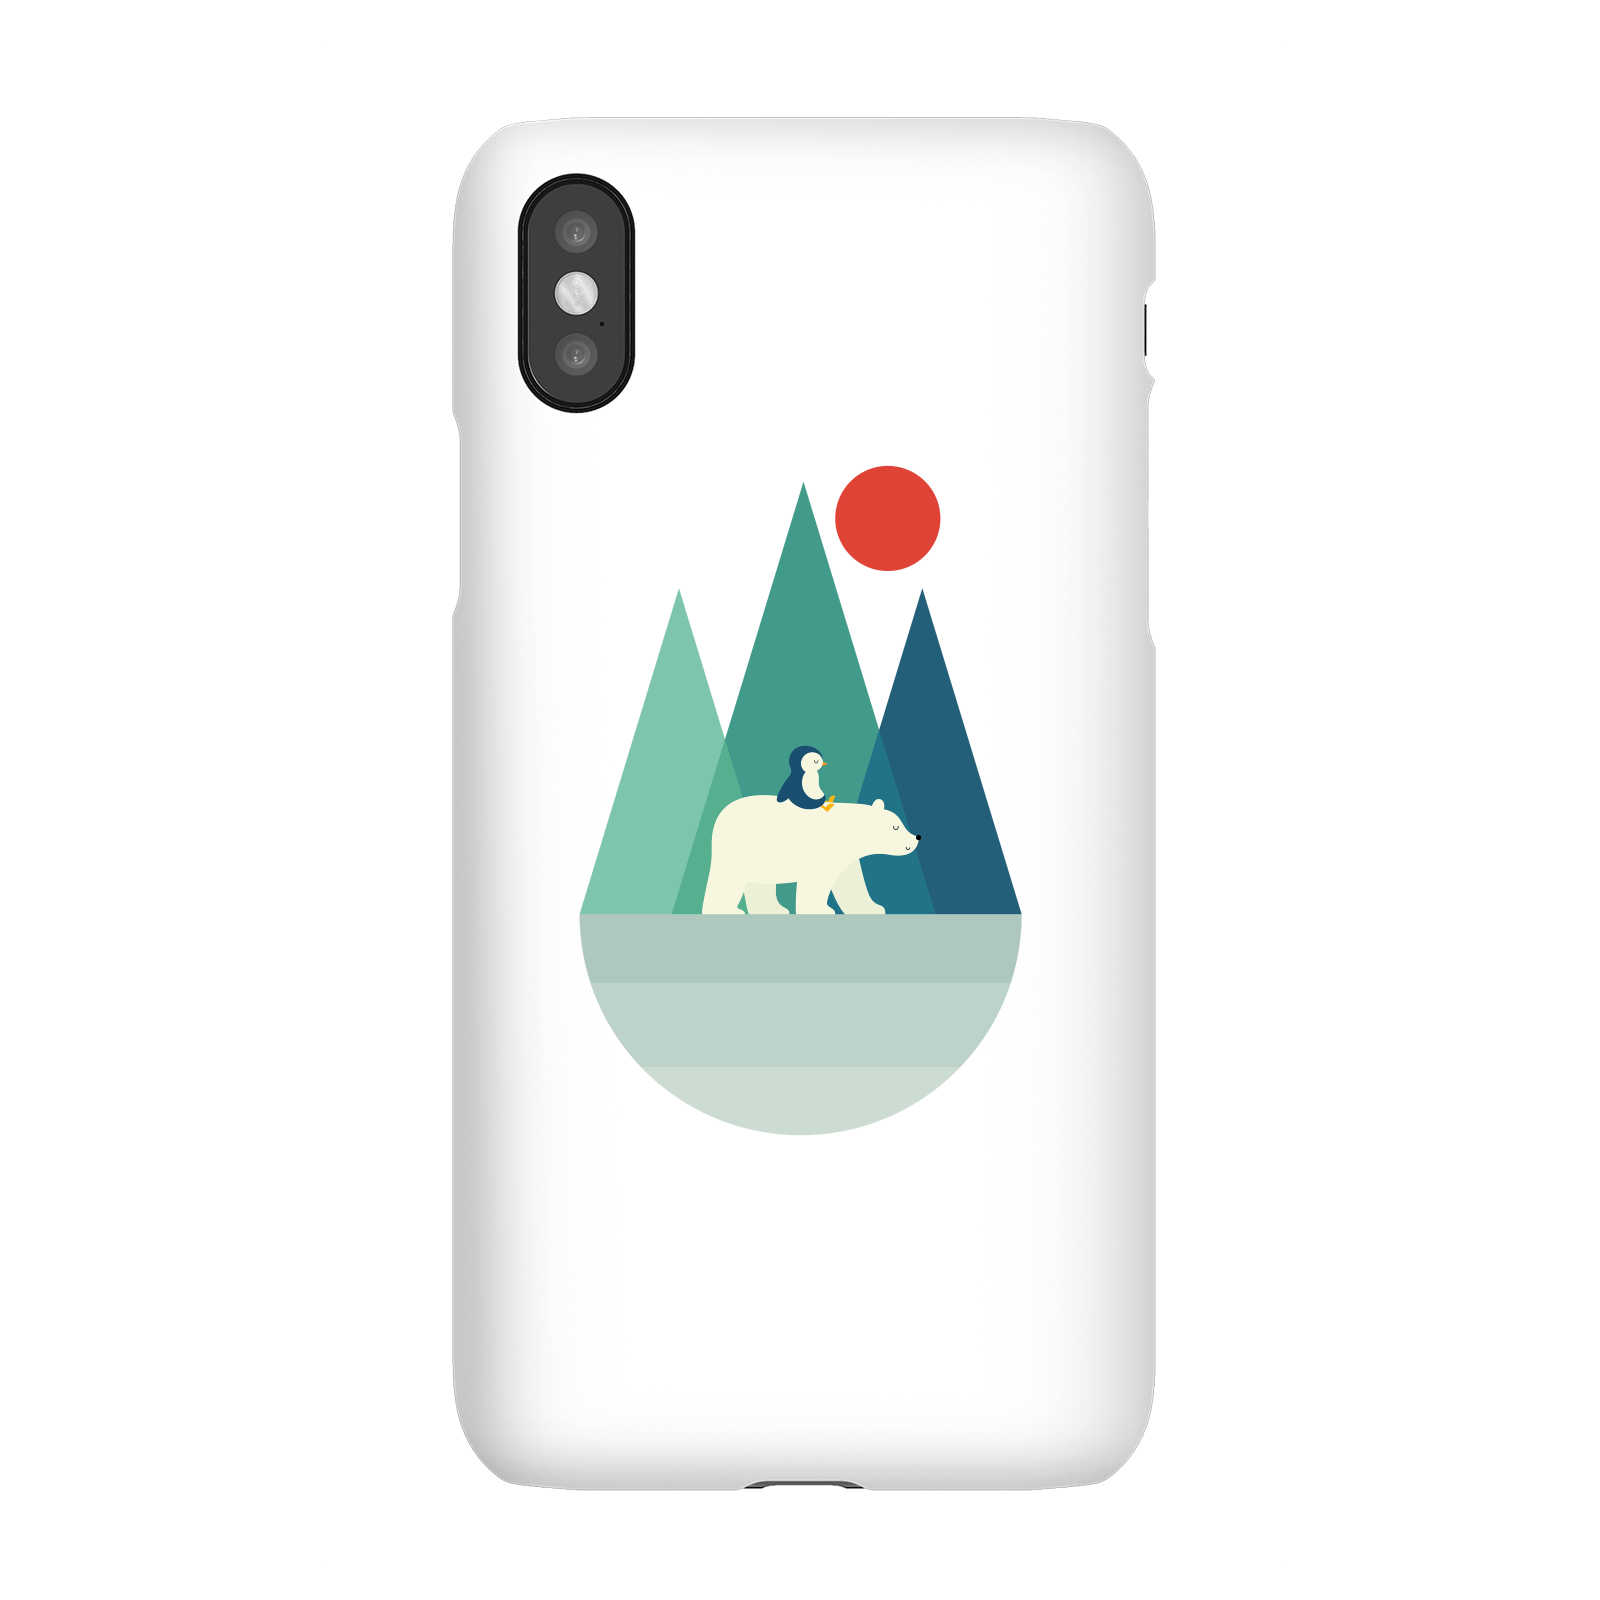 Andy Westface Bear You Phone Case for iPhone and Android - iPhone 11 Pro Max - Snap Case - Matte